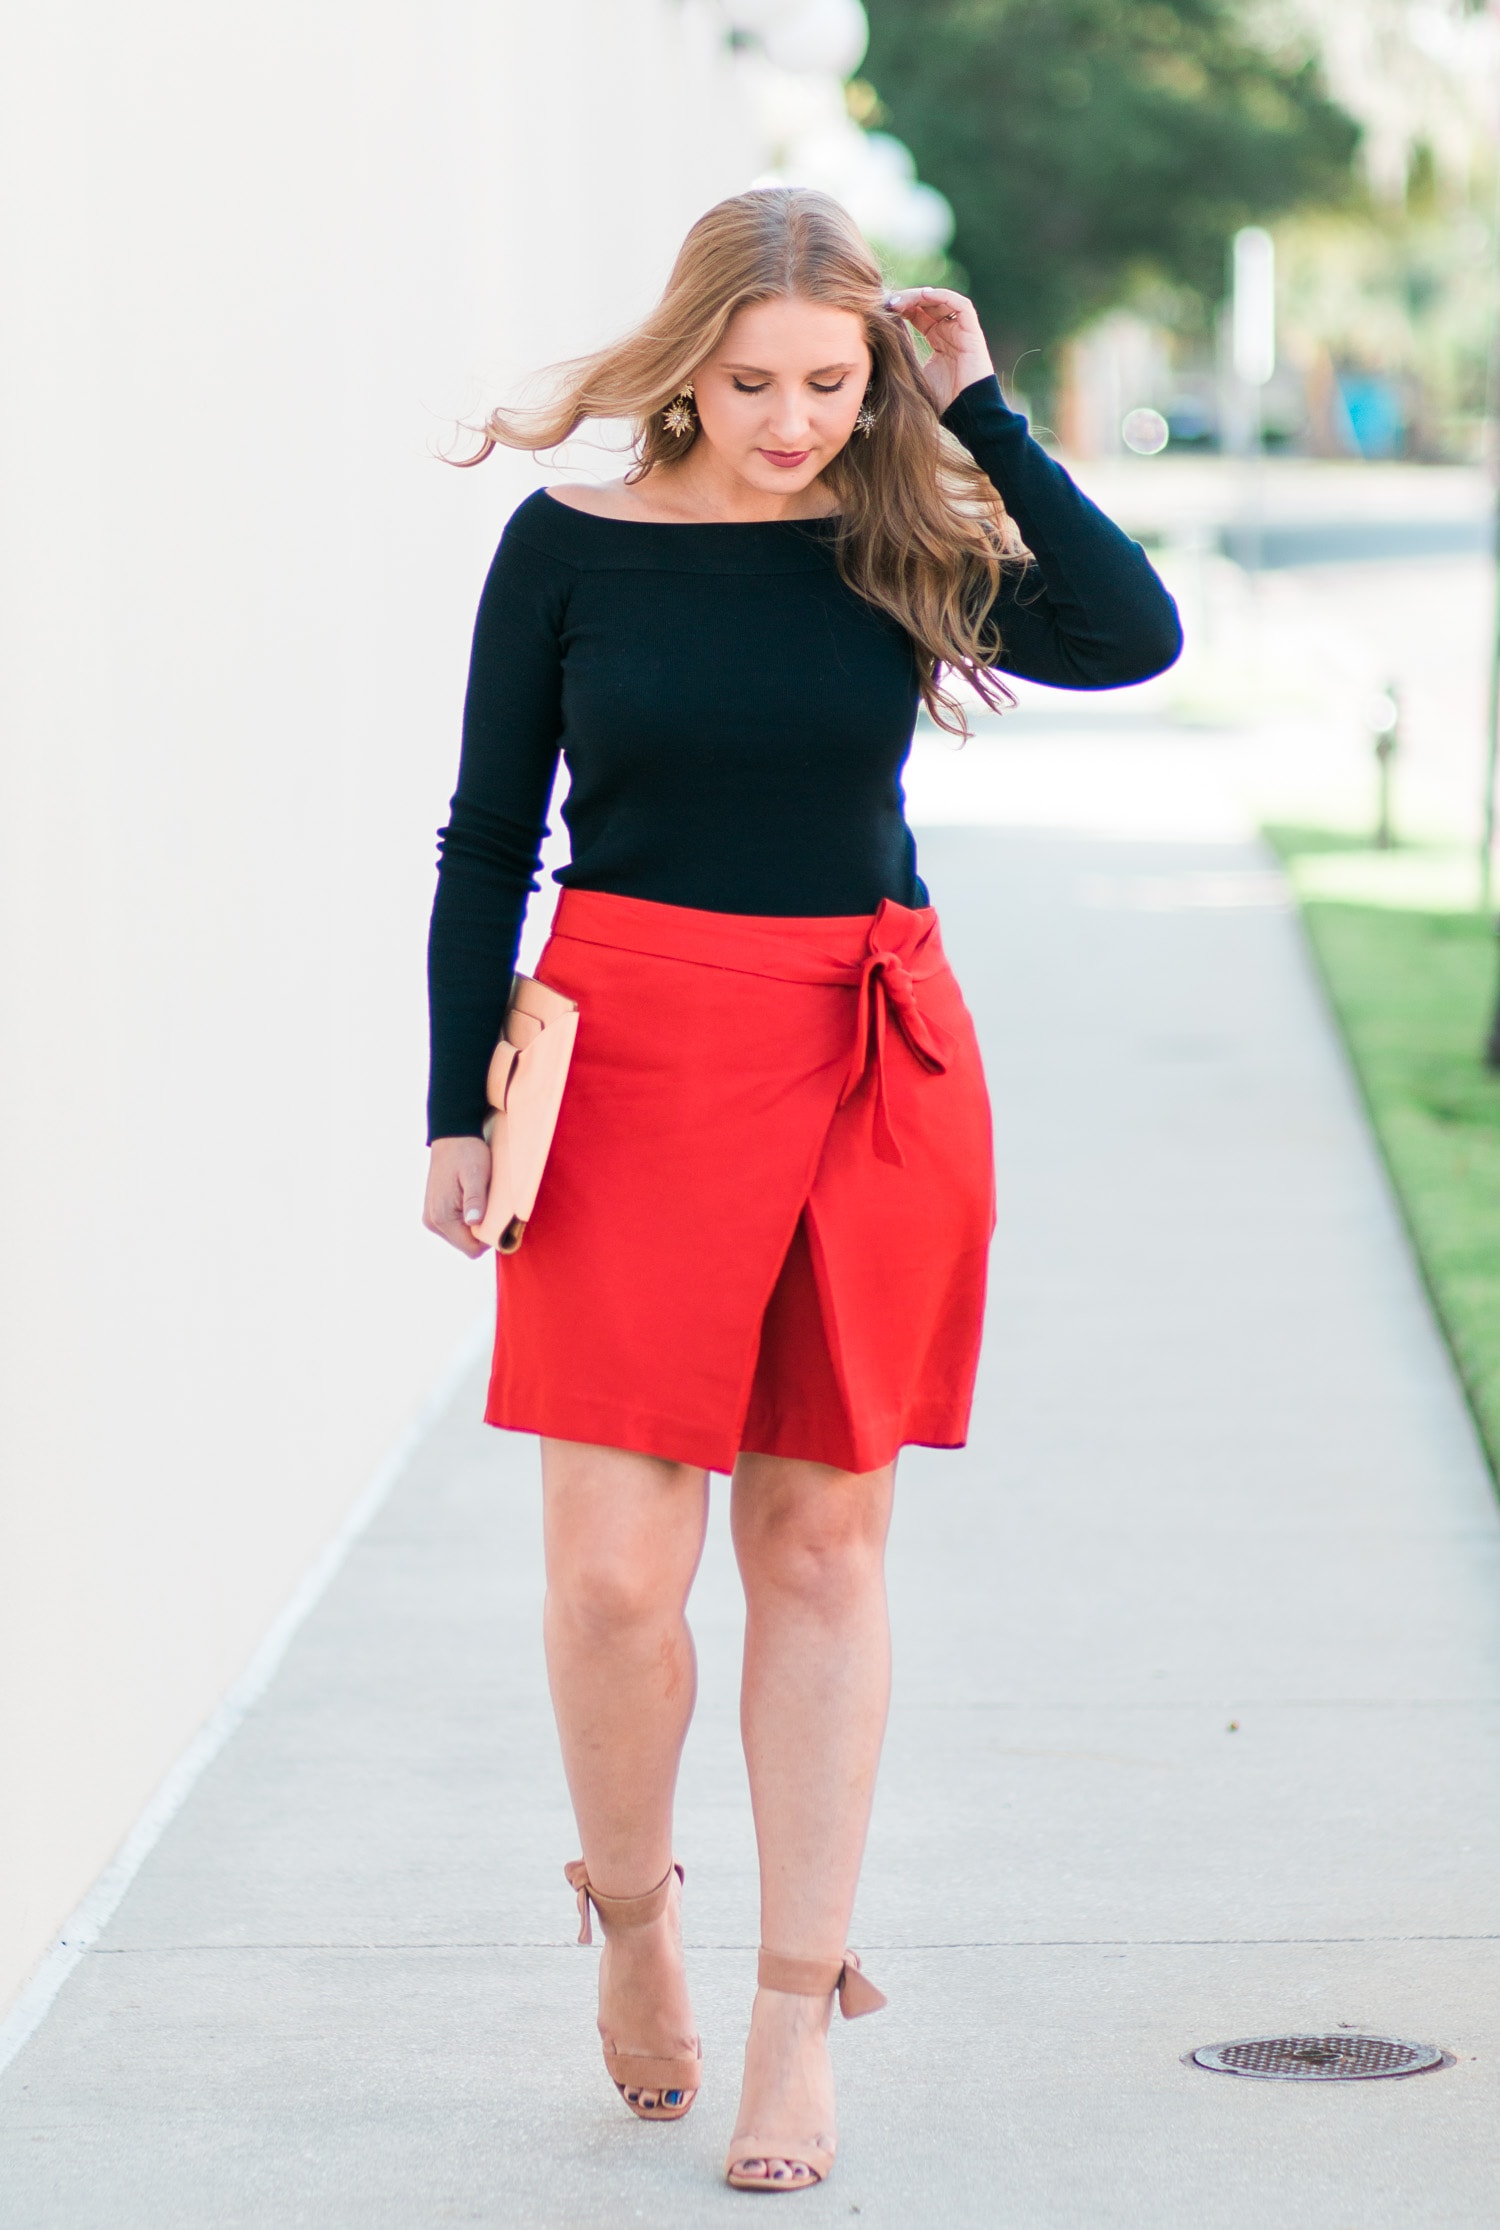 banana-republic-classy-fall-outfit-idea-orange-bow-skirt-navy-off-the-shoulder-sweater-nude-bow-clutch